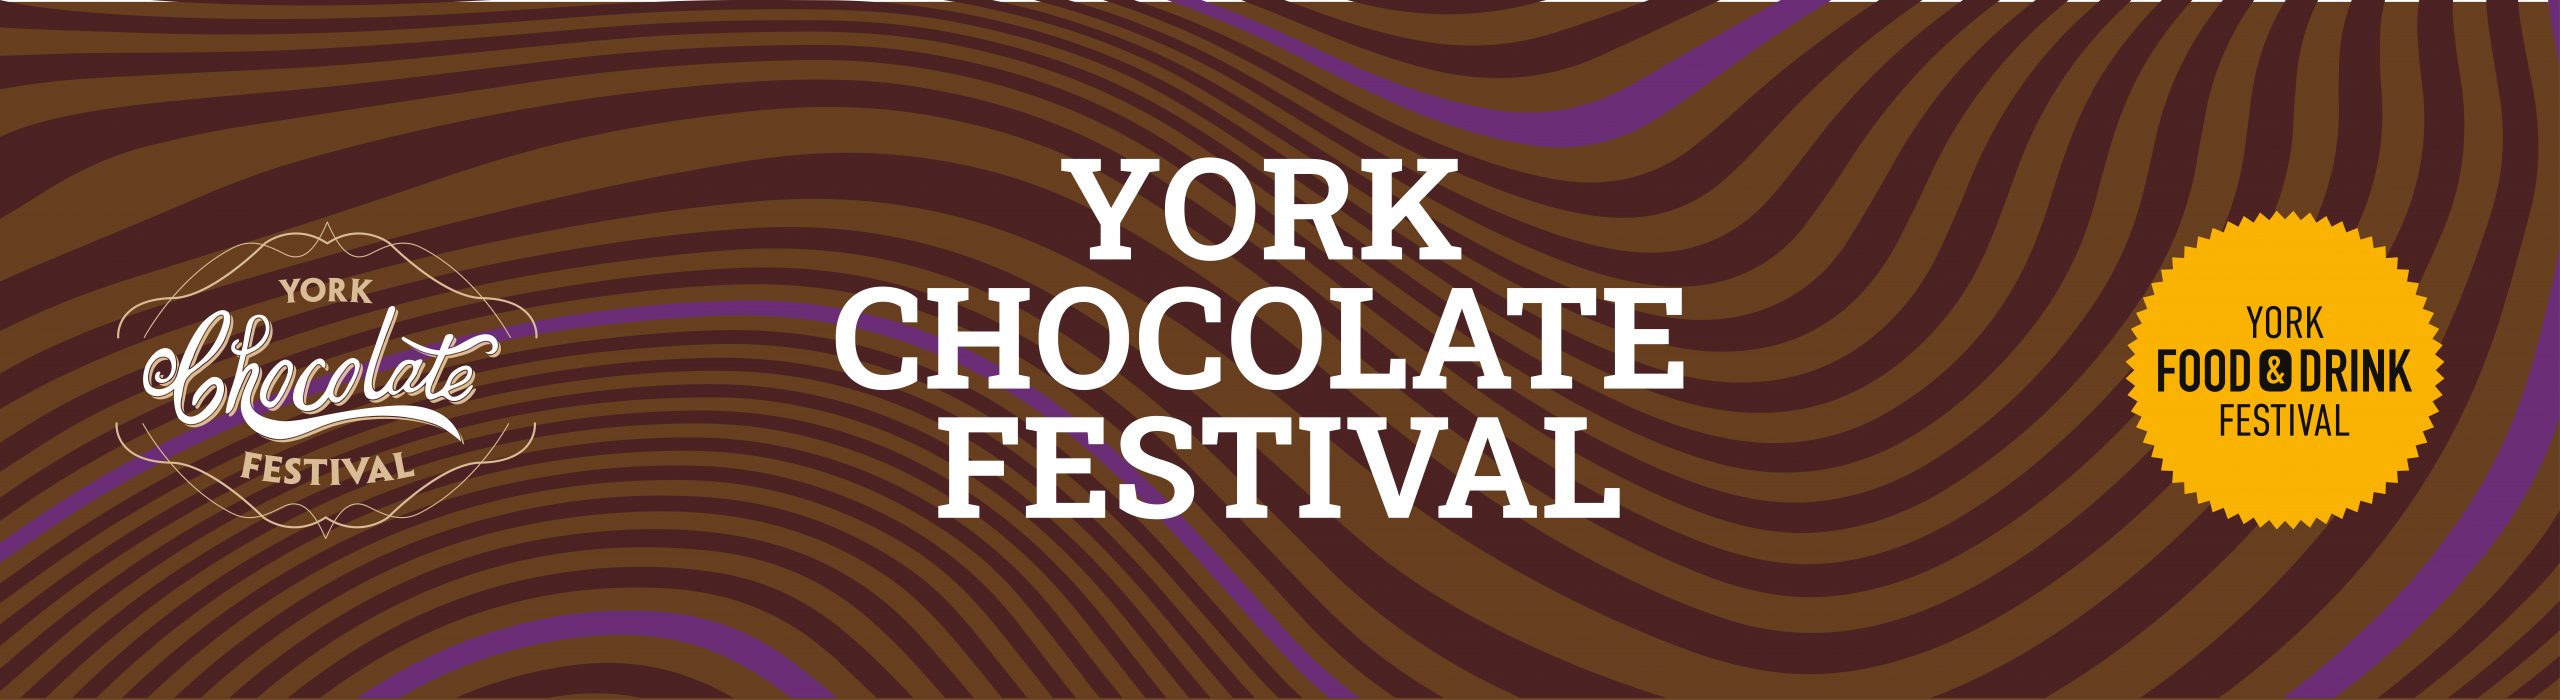 York Chocolate Festival Returns after 2 years York on a Fork